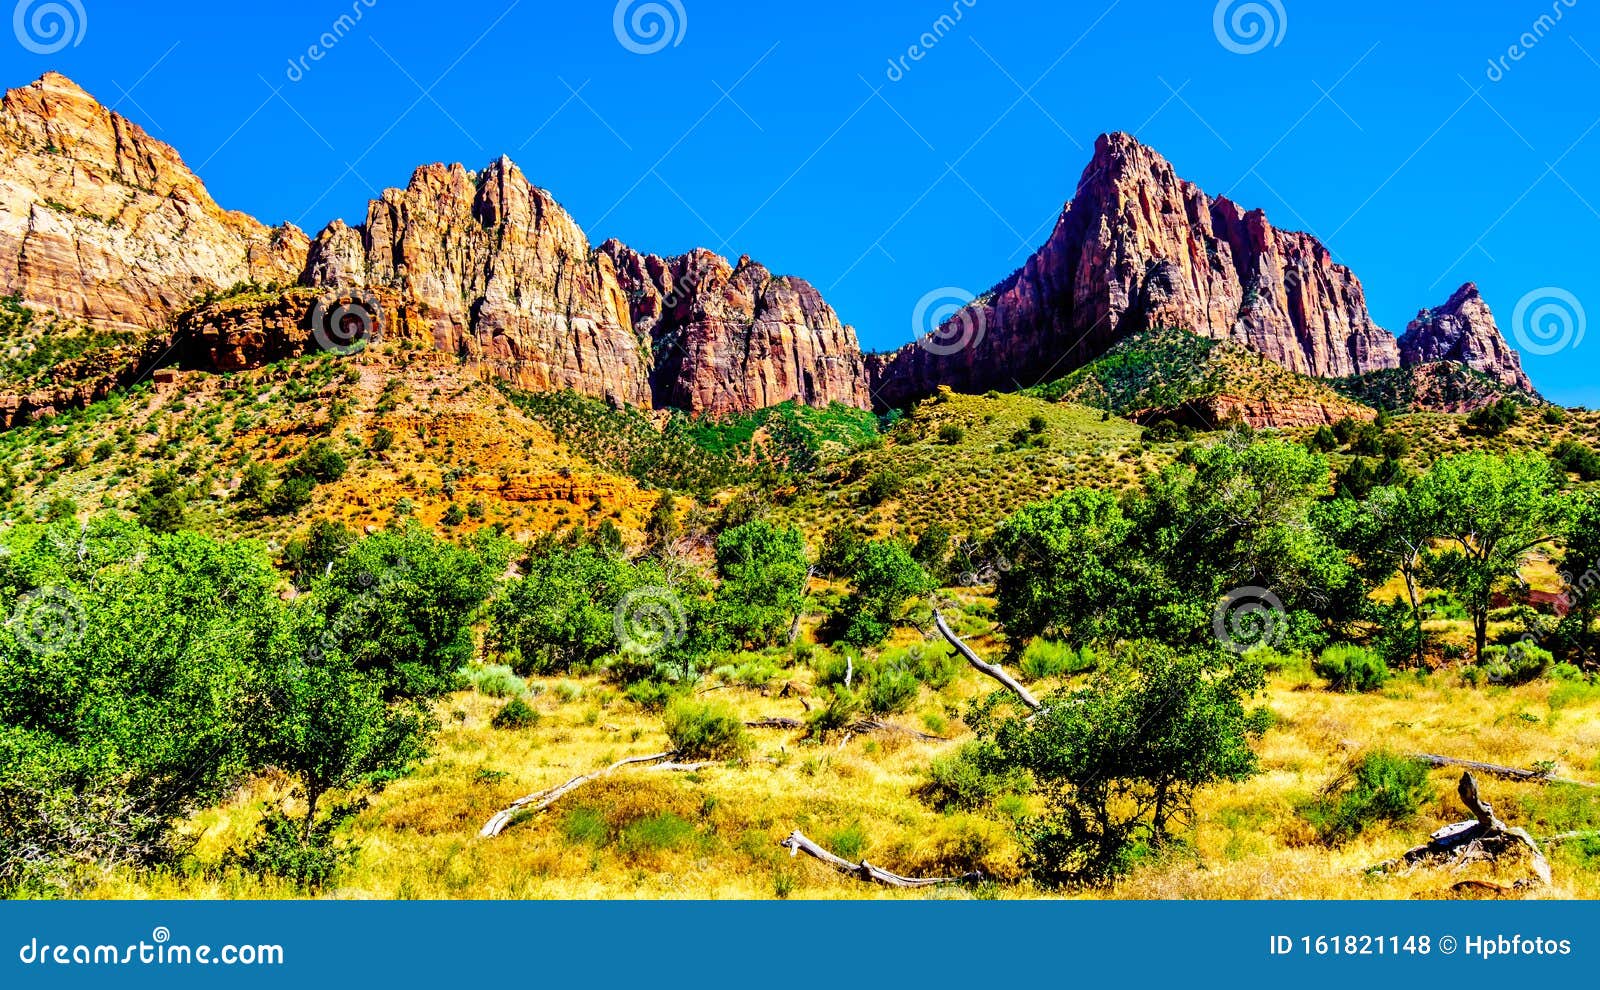 the watchman and bridge mountain viewed from the pa`rus trail in zion national park, ut, usa